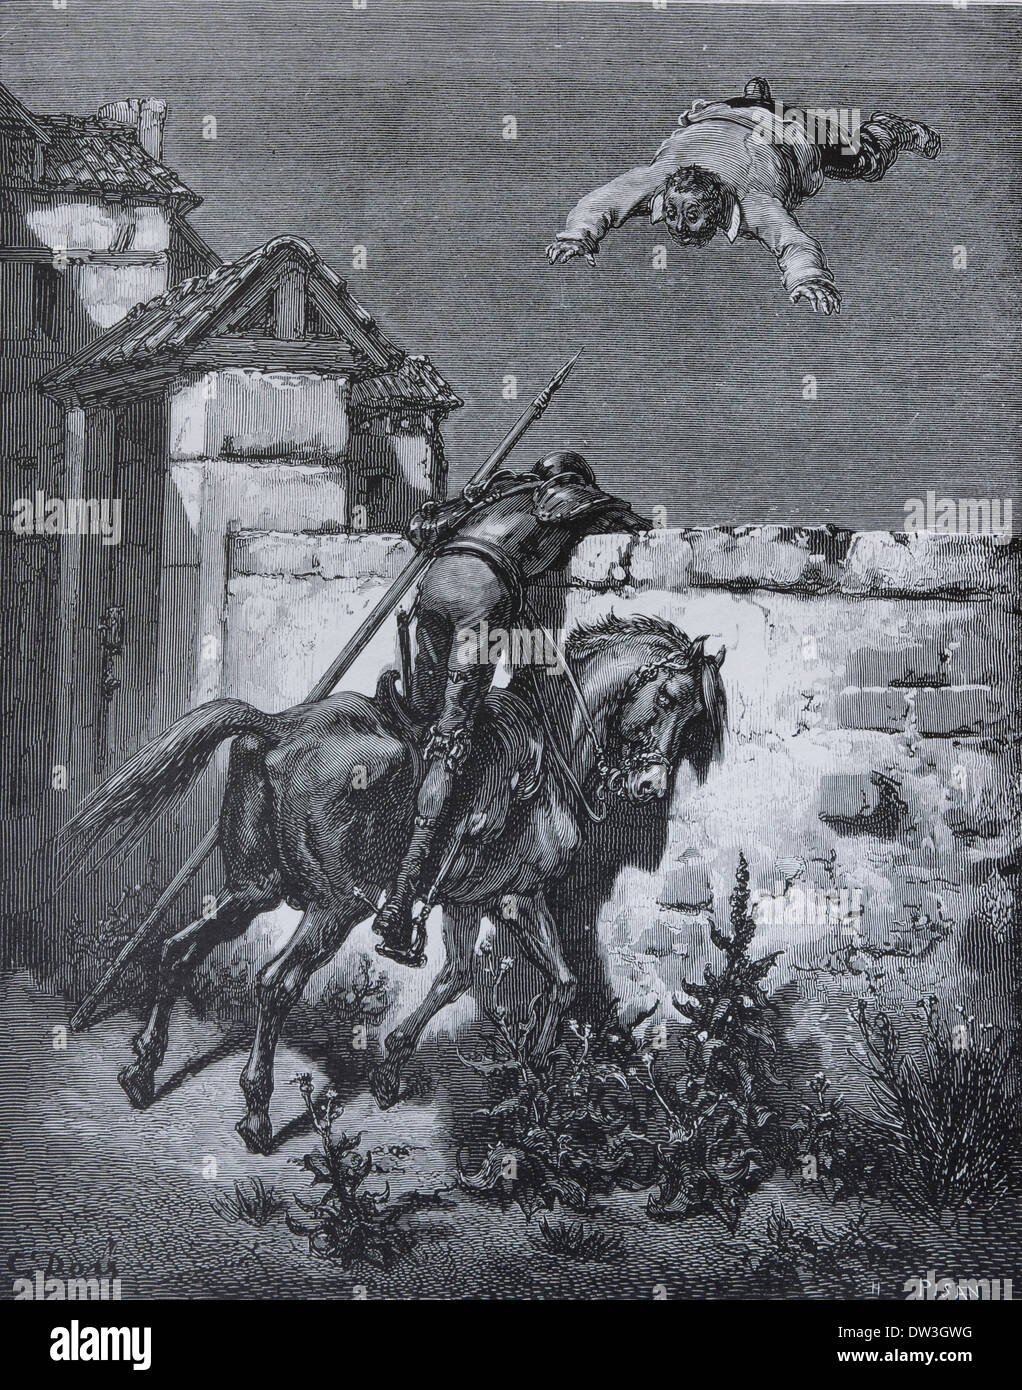 Don Quixote by Miguel de Cervantes. Don Quixote's remonstraces fail to influence the tossers. Part I, 17. Illustrated by Dore Stock Photo